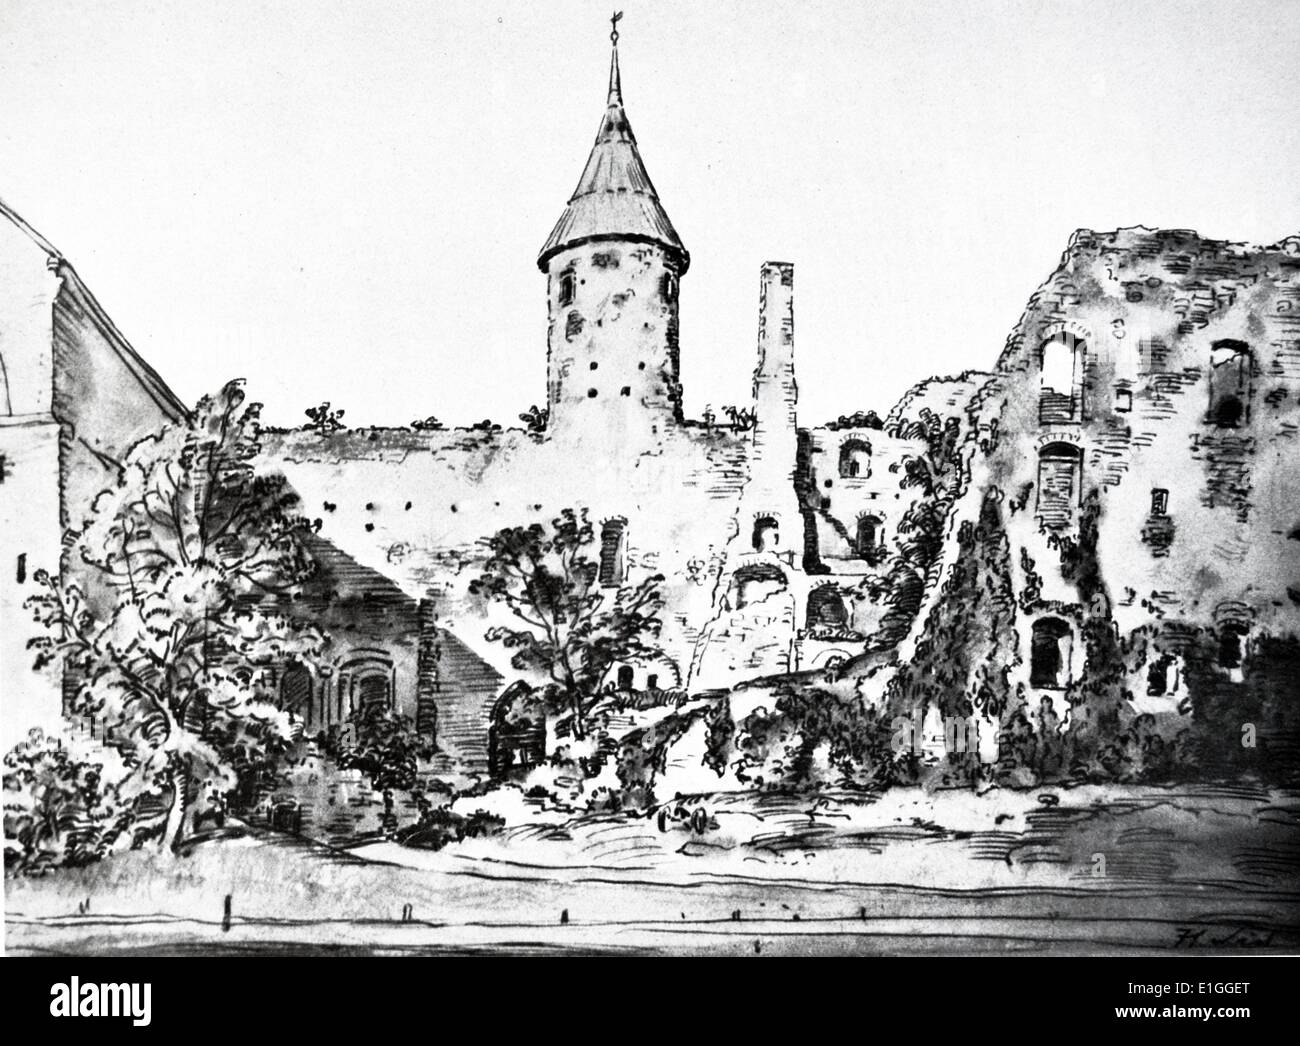 Ruined Castle at Haspal'  by Hans list.  Published in 'Die Kunst im deutschen Reich' (Art in the German Reich) was first published in January 1937 by Gauleiter Adolf Wagnerand later issued under the direction Adolf Hitler himself. Stock Photo